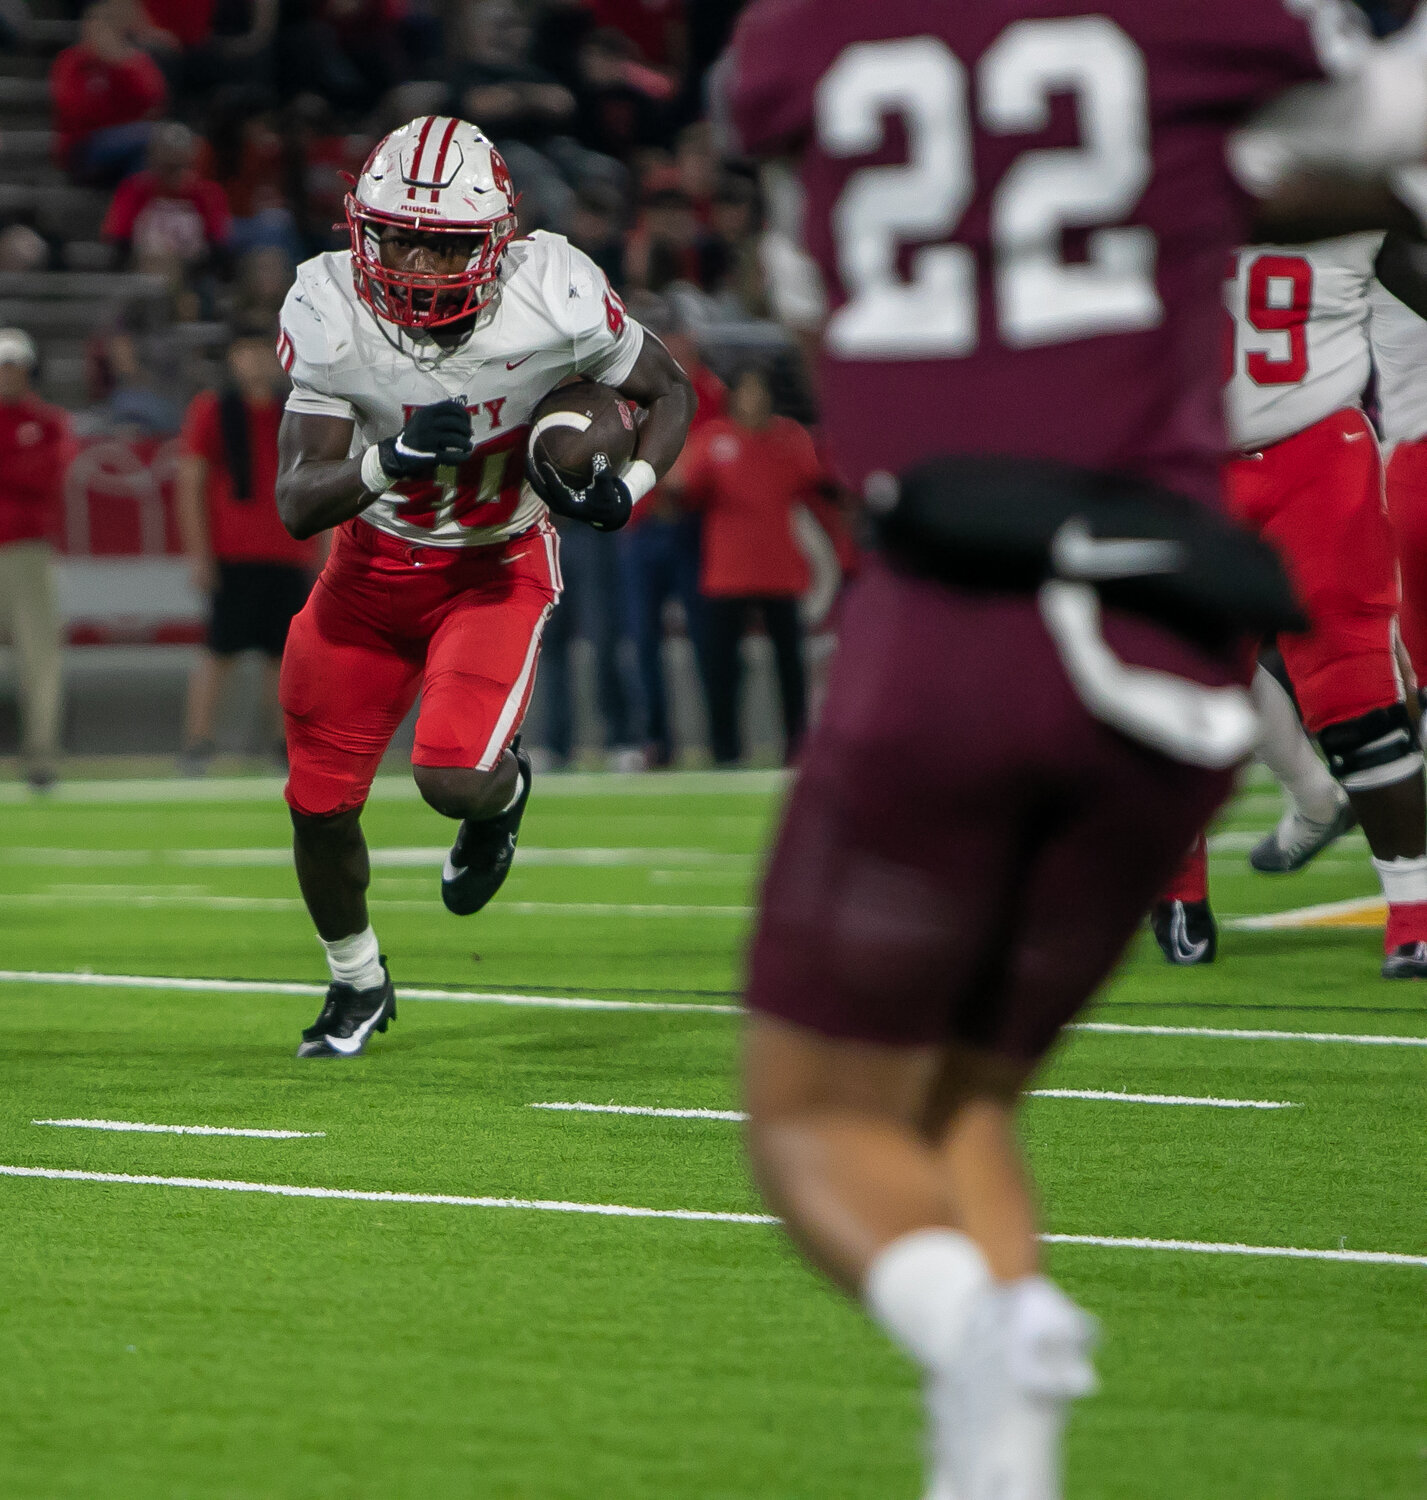 Tremayne Hill runs the ball during Friday's area round game between Katy and Cy-Fair at the Berry Center in Cypress.